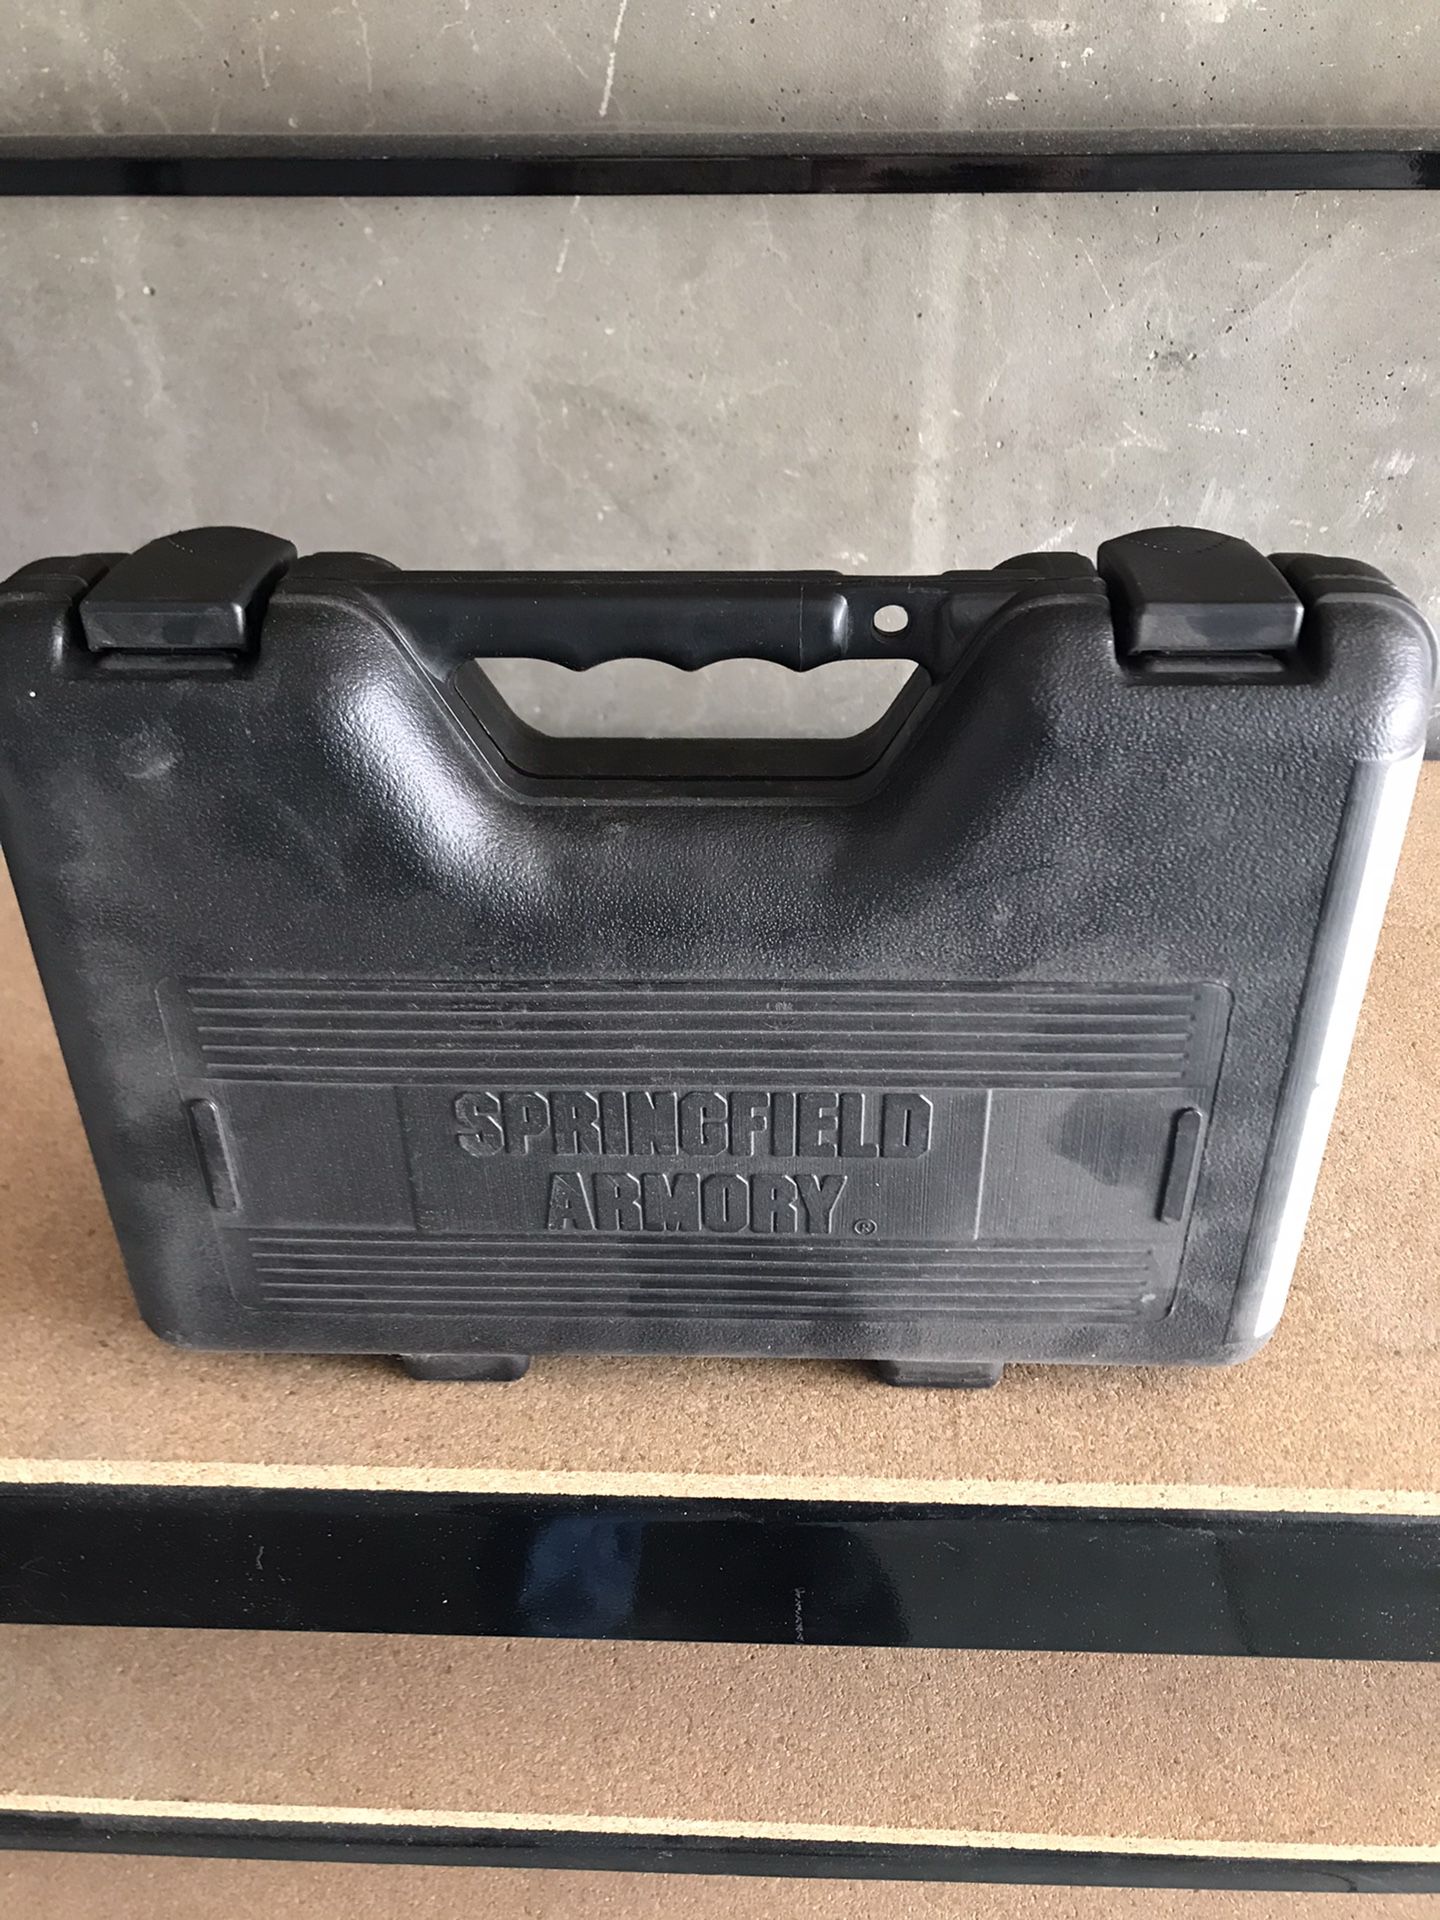 Springfield armory case with duel clip holder